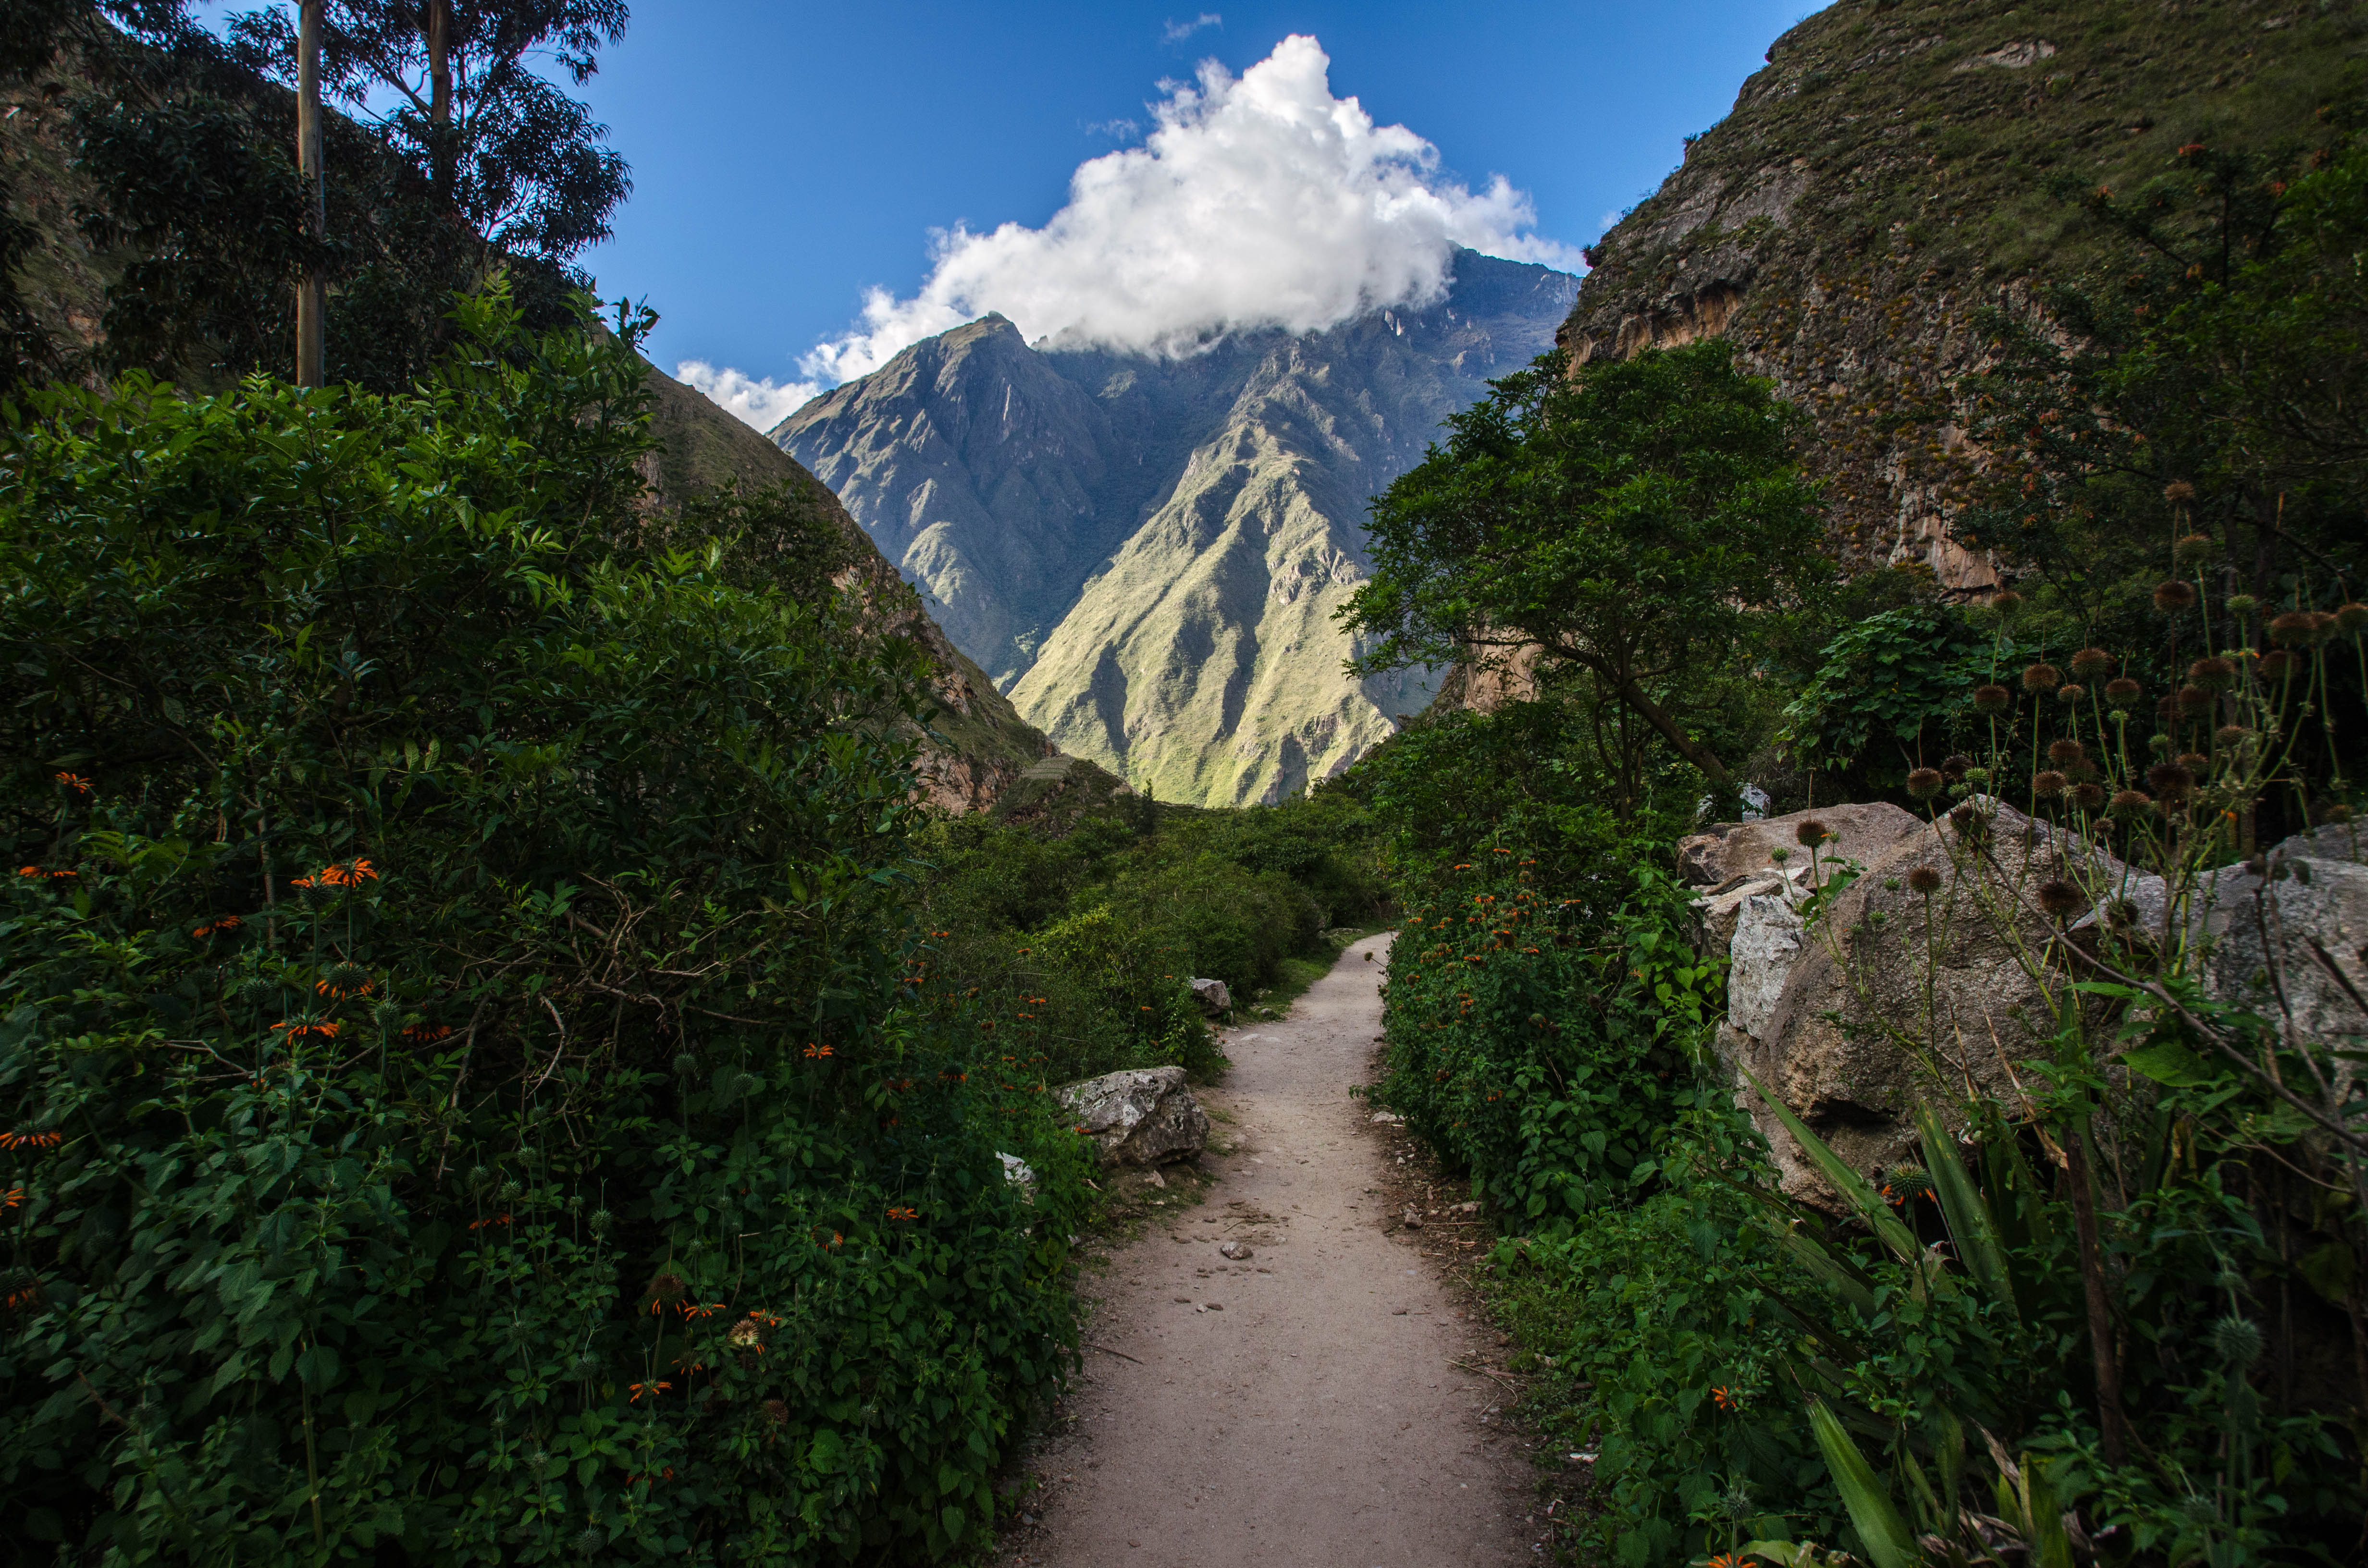 Inca Trail with views of green mountain peaks